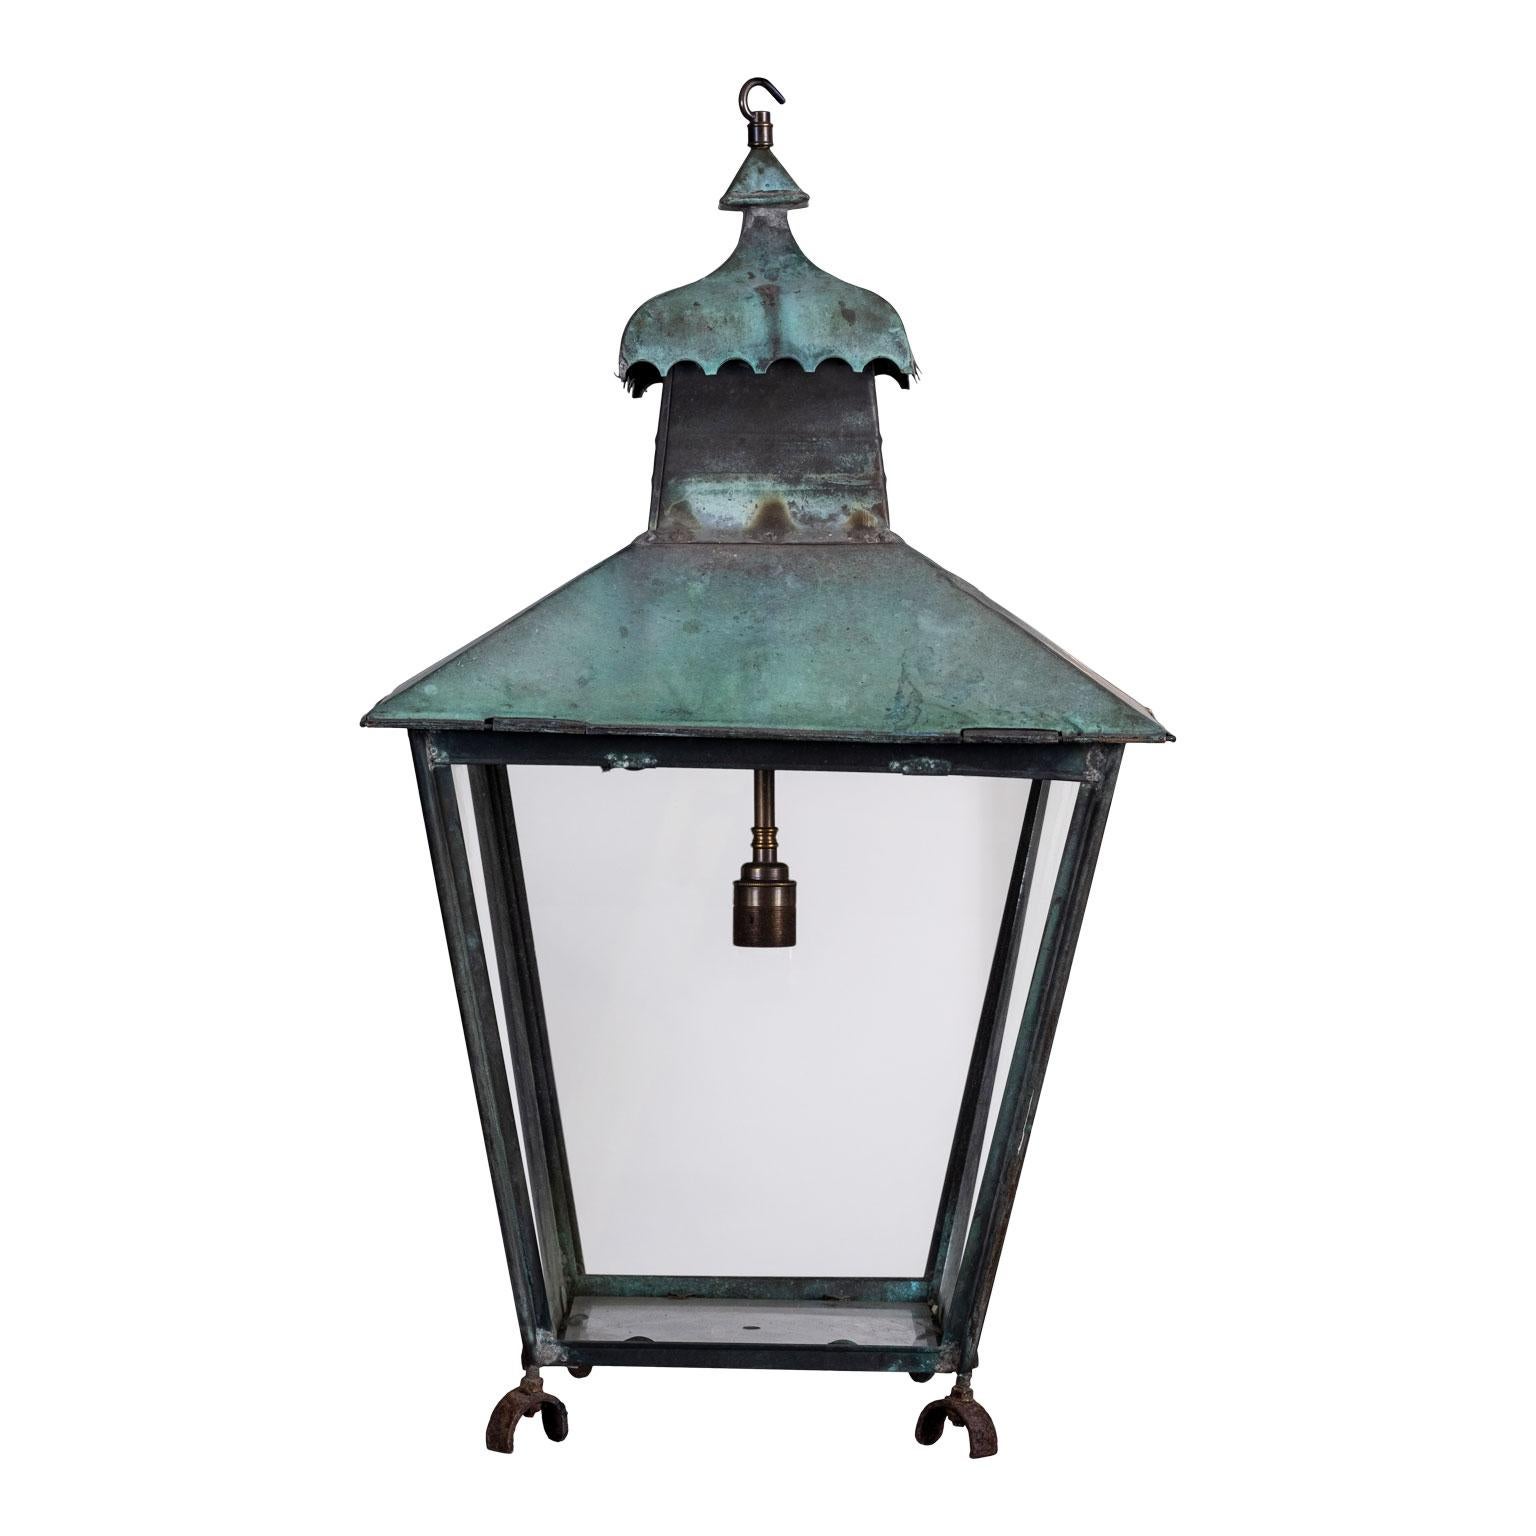 Georgian style copper lantern paneled in glass, circa 1920. Includes chain and a canopy (listed height does not include chain). Lantern can either be wired for electricity or fitted for use with gas for an extra cost.